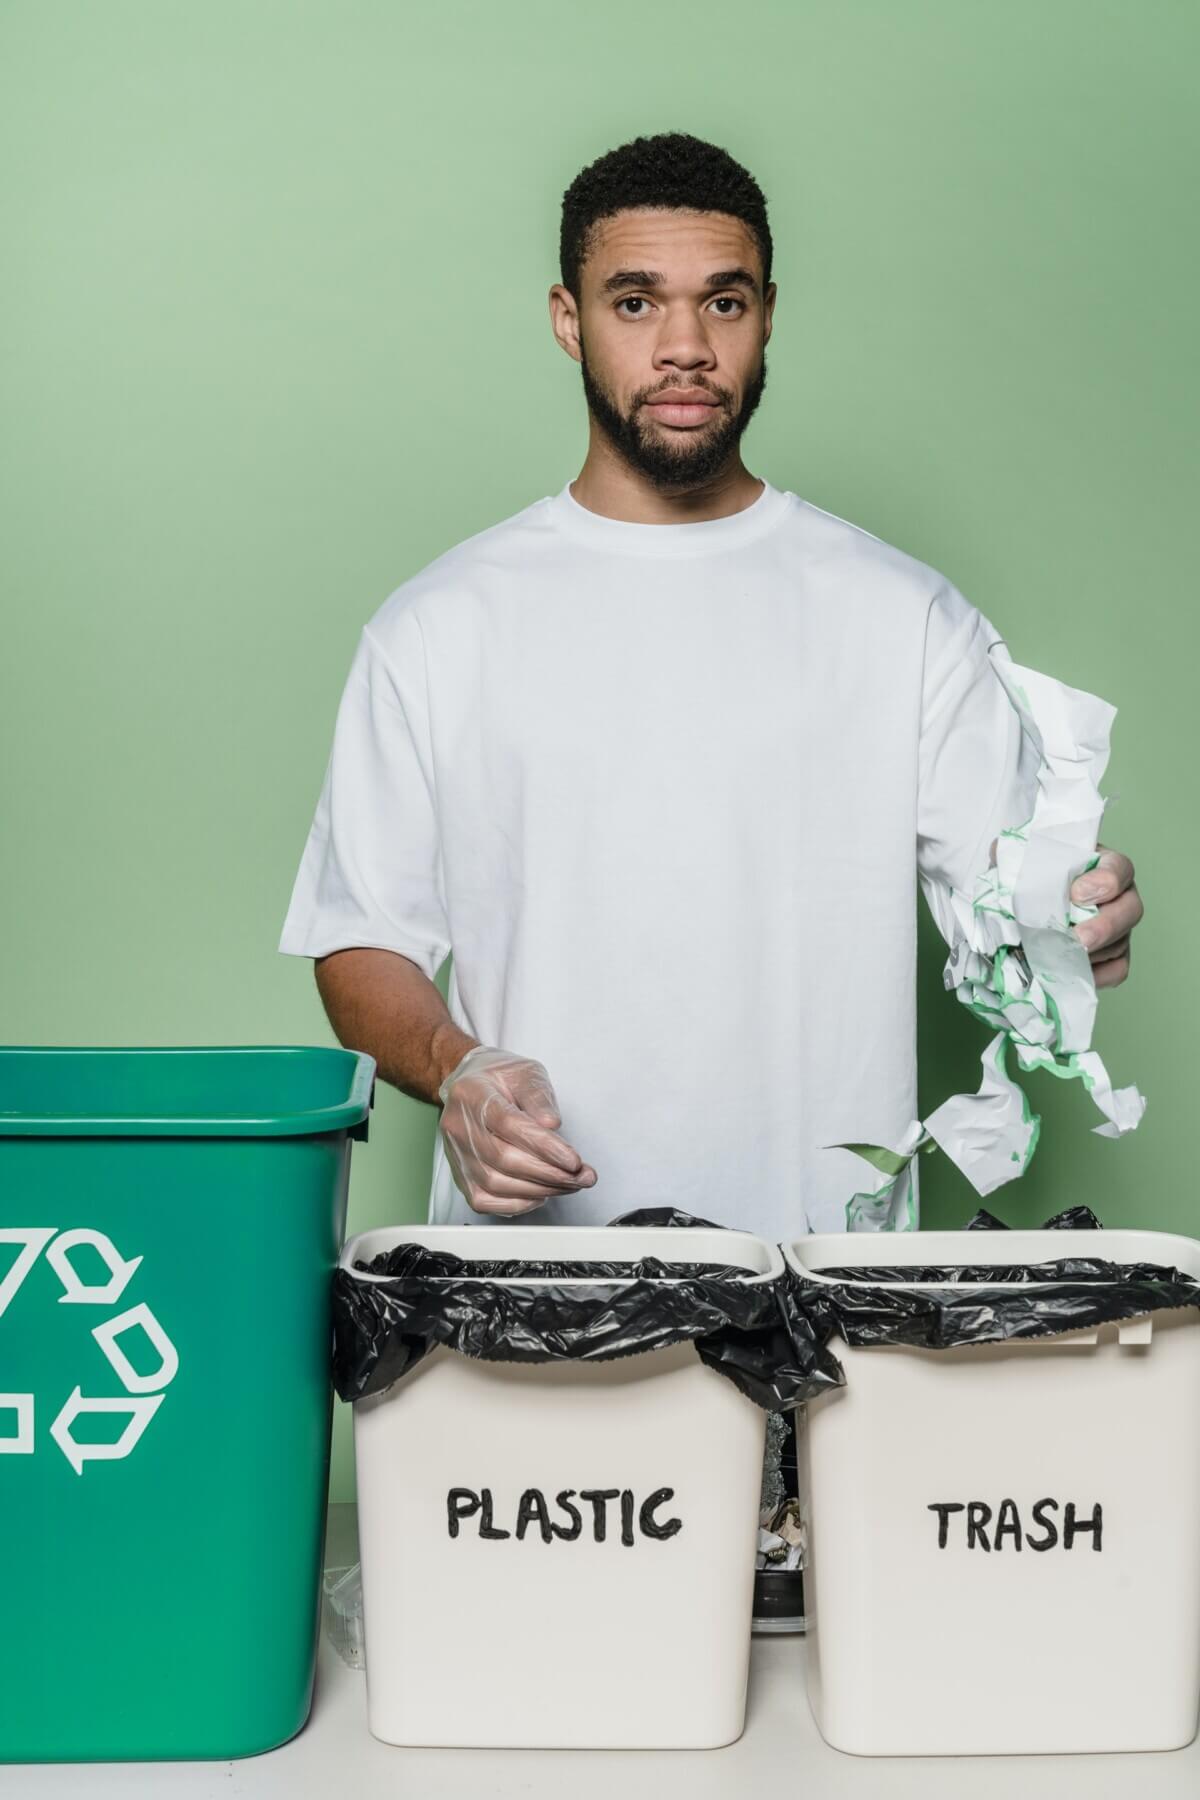 Person sorting trash in recycling bins